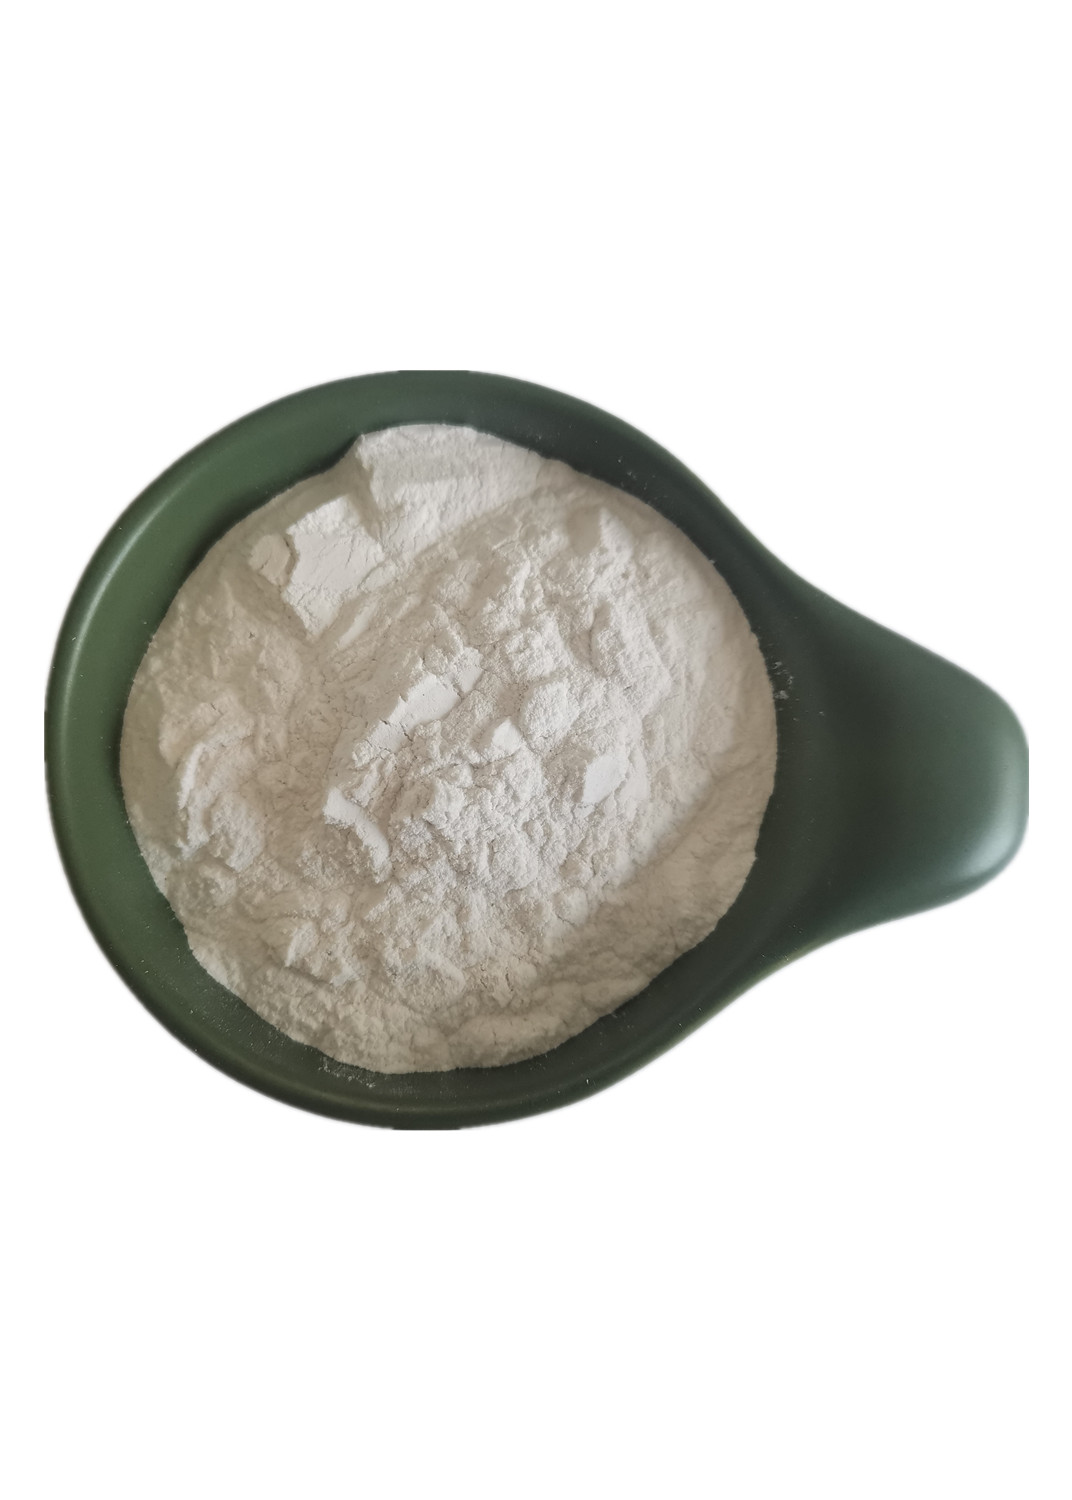 Europe style for Filter Aid Uses - Diatomite Earth Powder Wholesale Price Manufacturer Direct Supply for Filter Use Free Samples – Yuantong